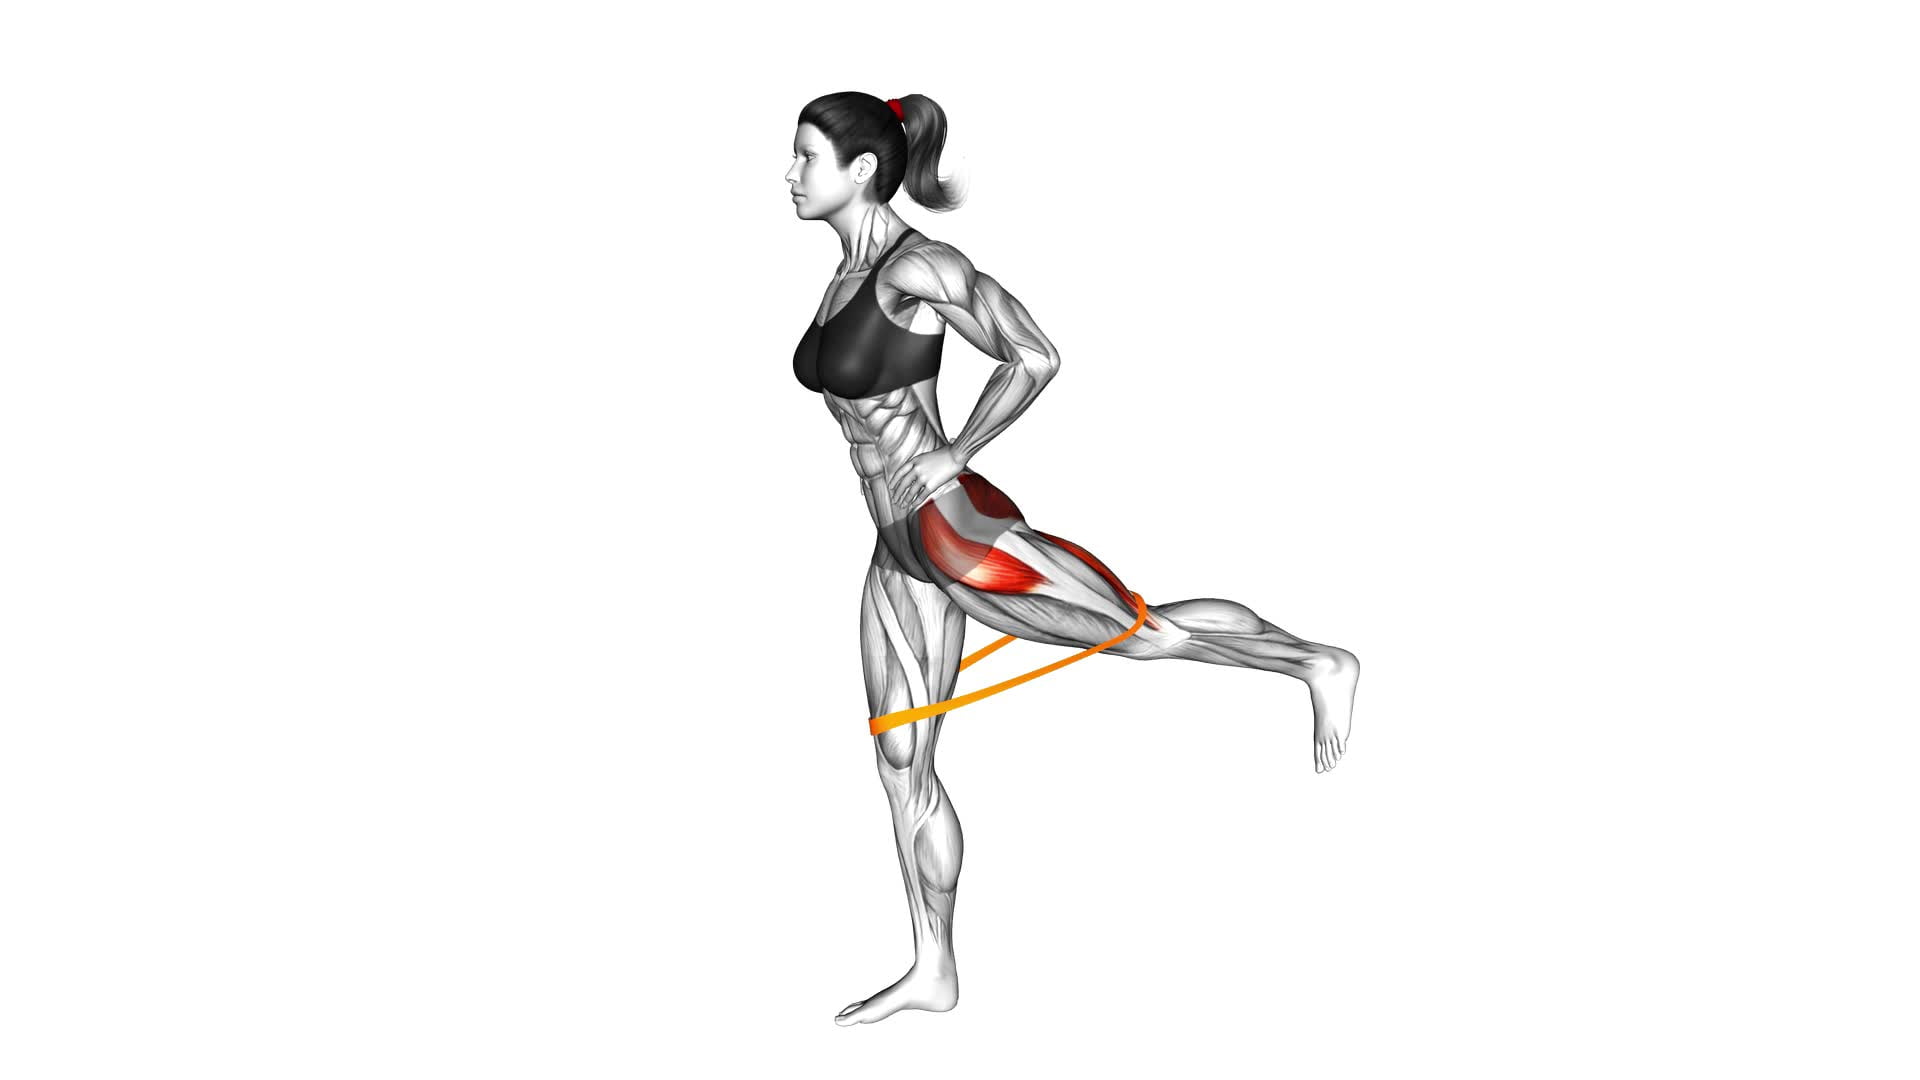 Resistance Band Standing Balance Glute Kickback (VERSION 2) (female) - Video Exercise Guide & Tips